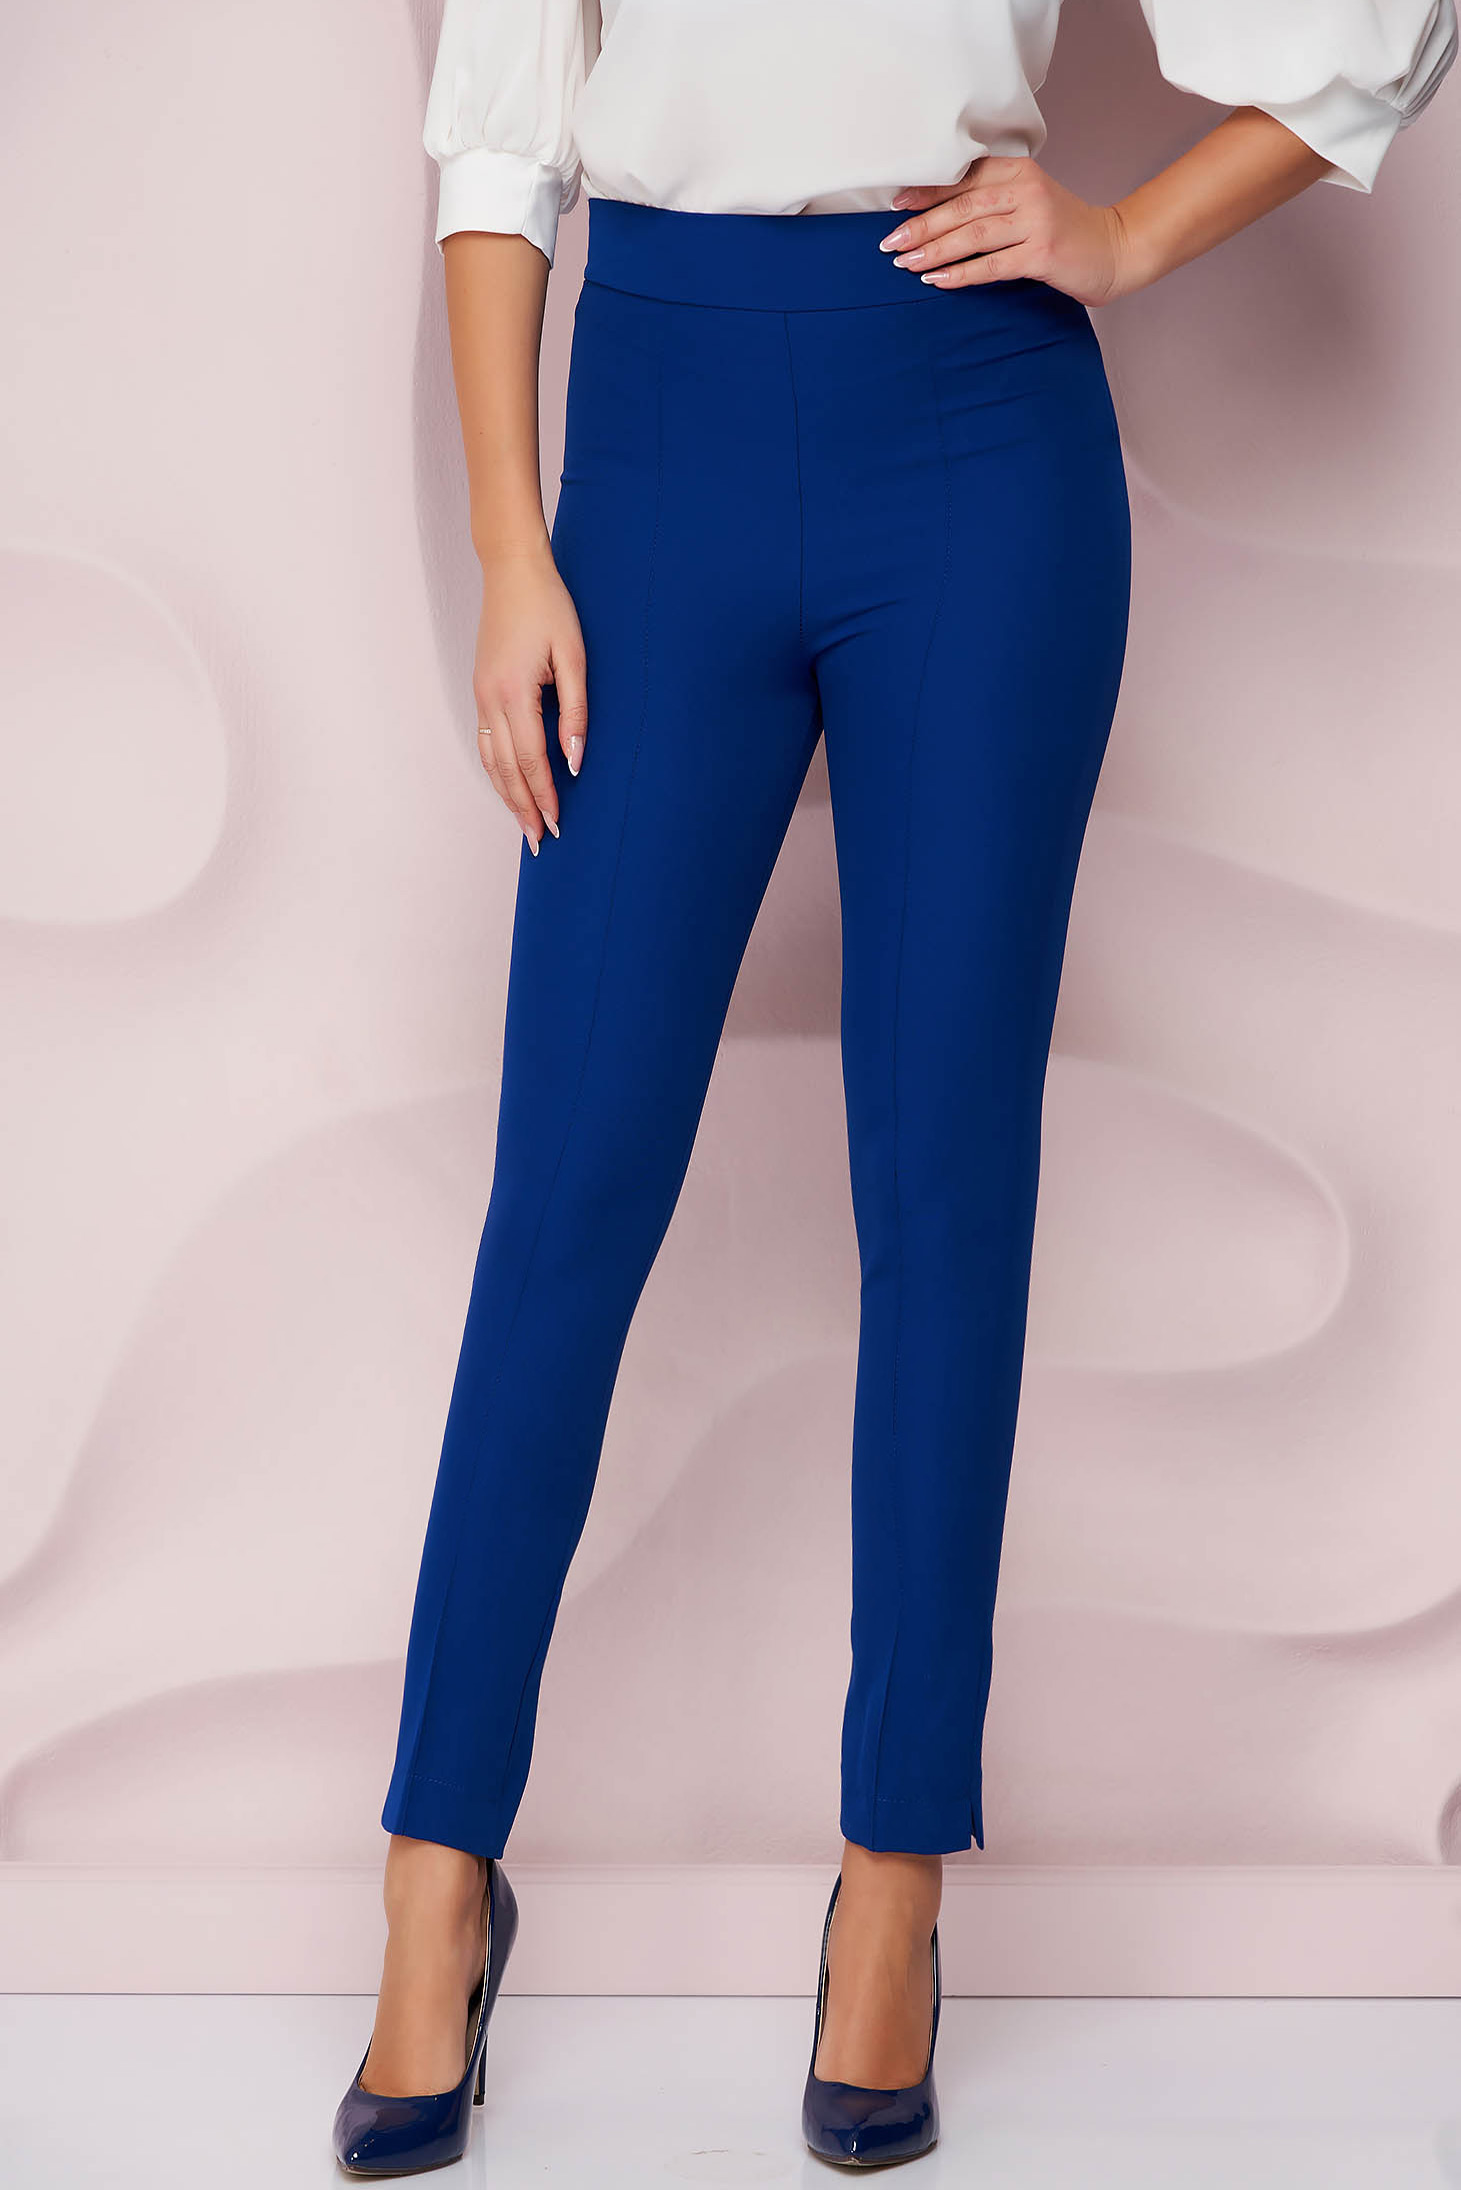 Blue trousers conical high waisted cloth